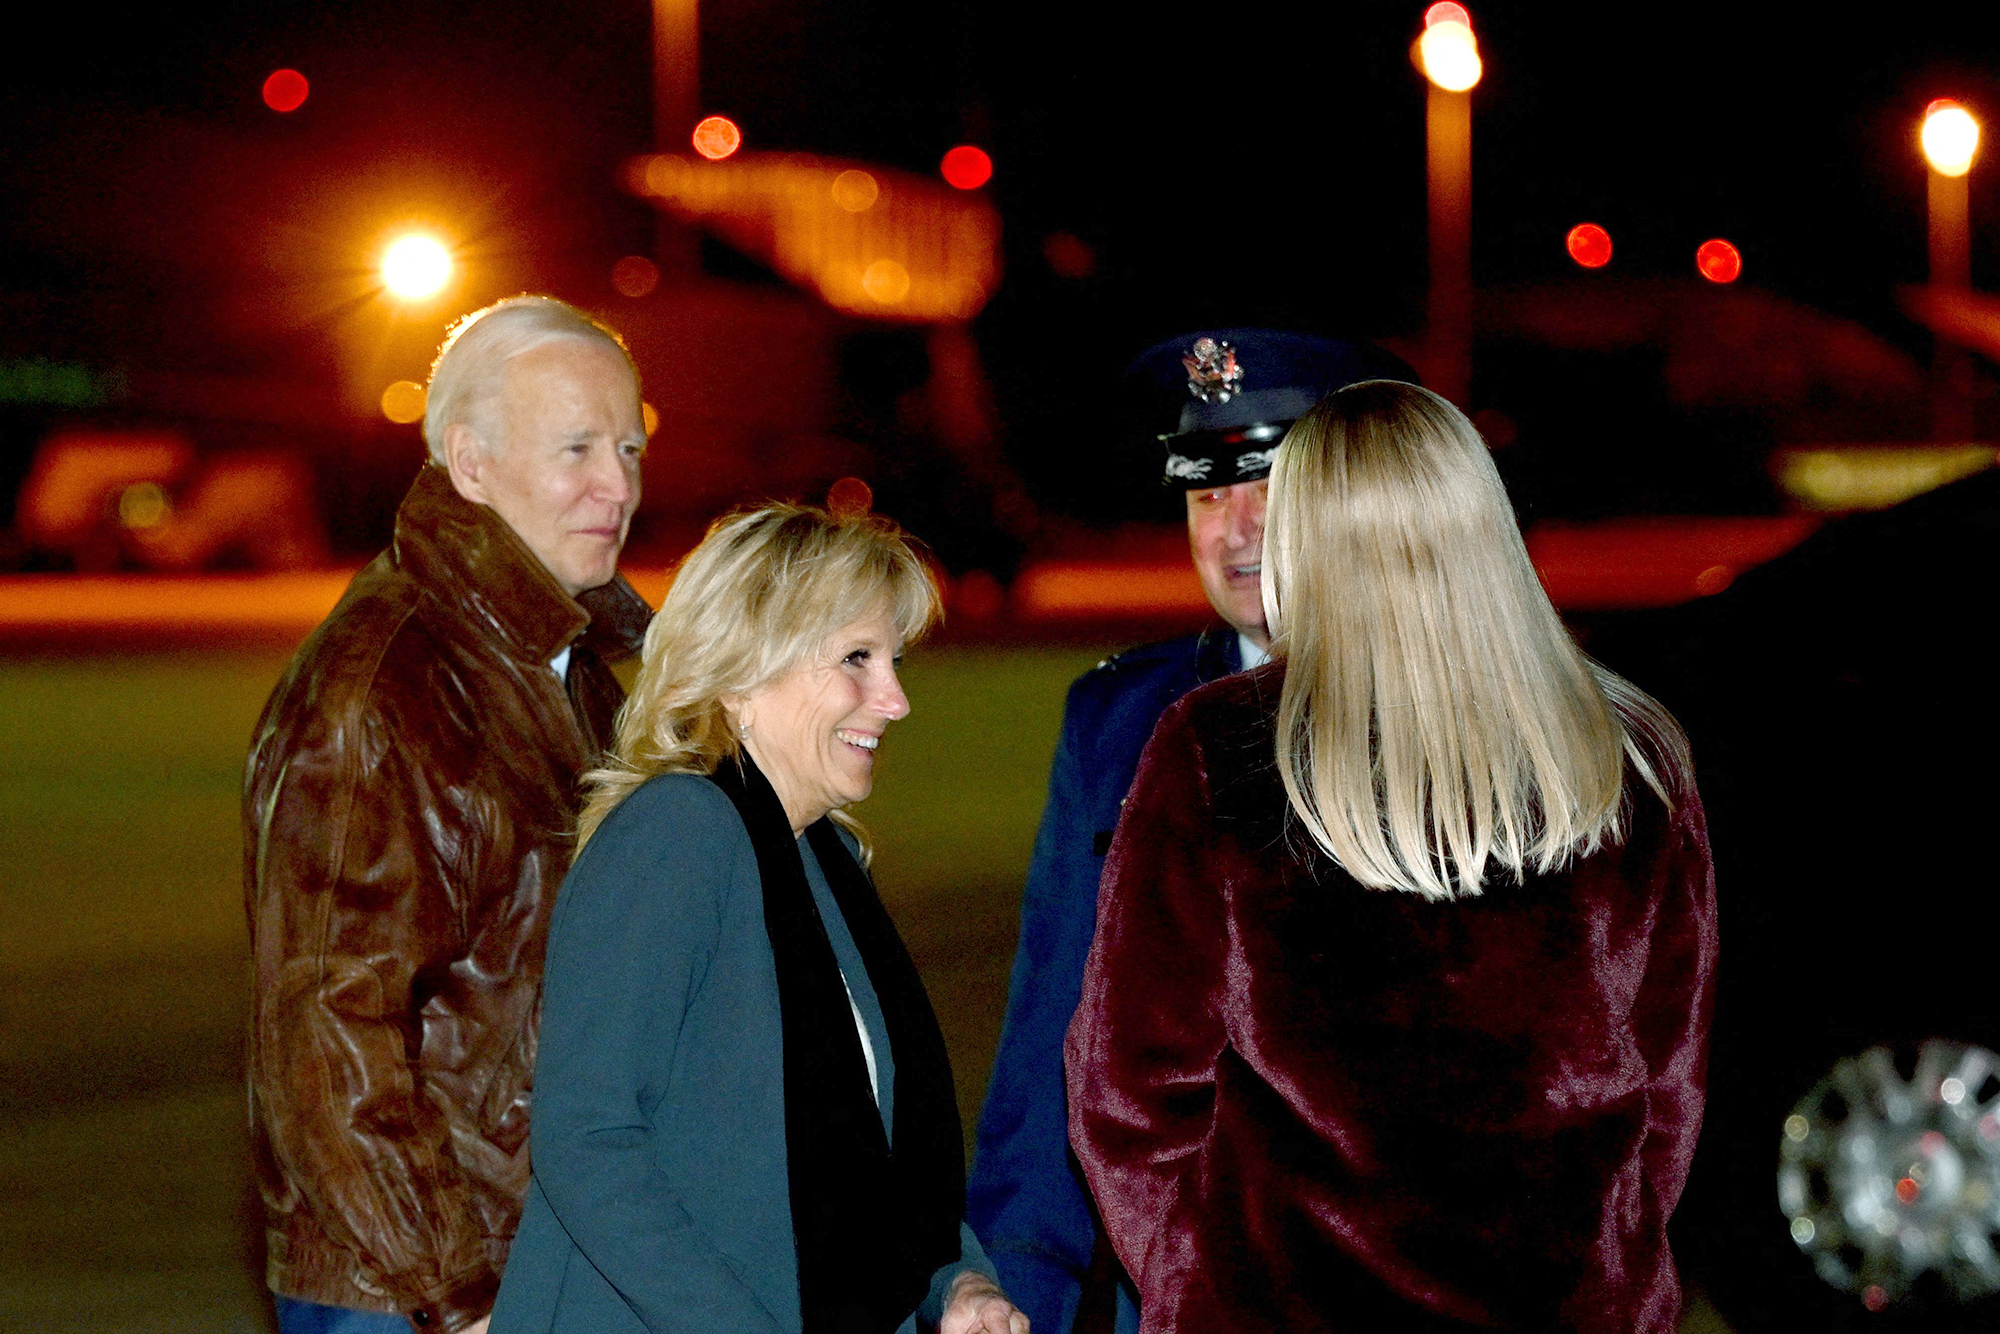 PHOTO: President Joe Biden and US First Lady Jill Biden walk to board Air Force One at Joint Base Andrews in Maryland, Nov. 22, 2022.